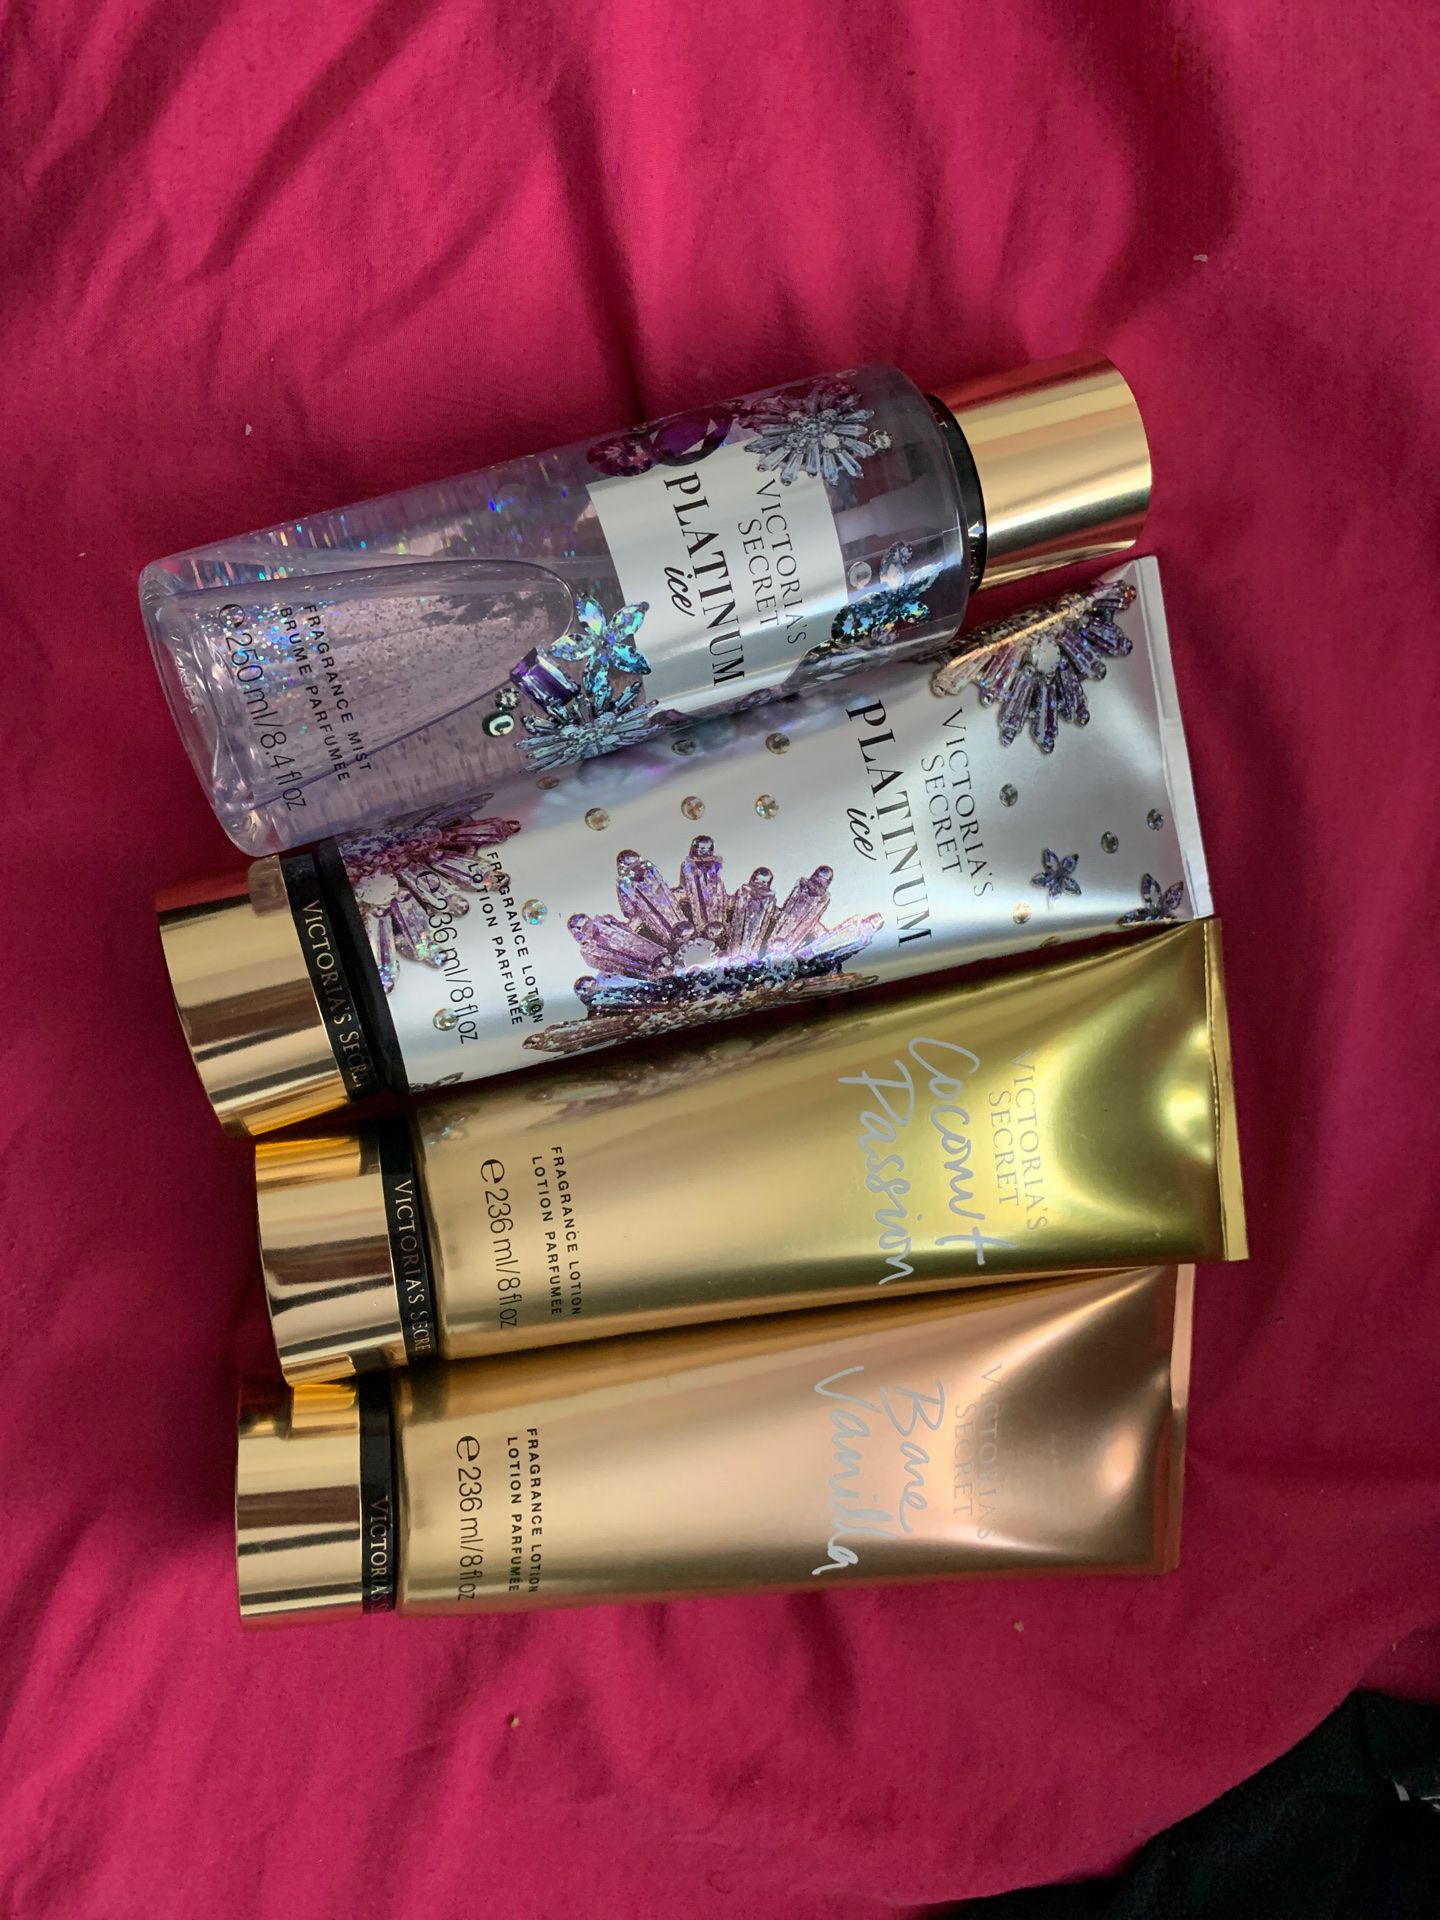 Victoria’s Secret Perfume and Lotions